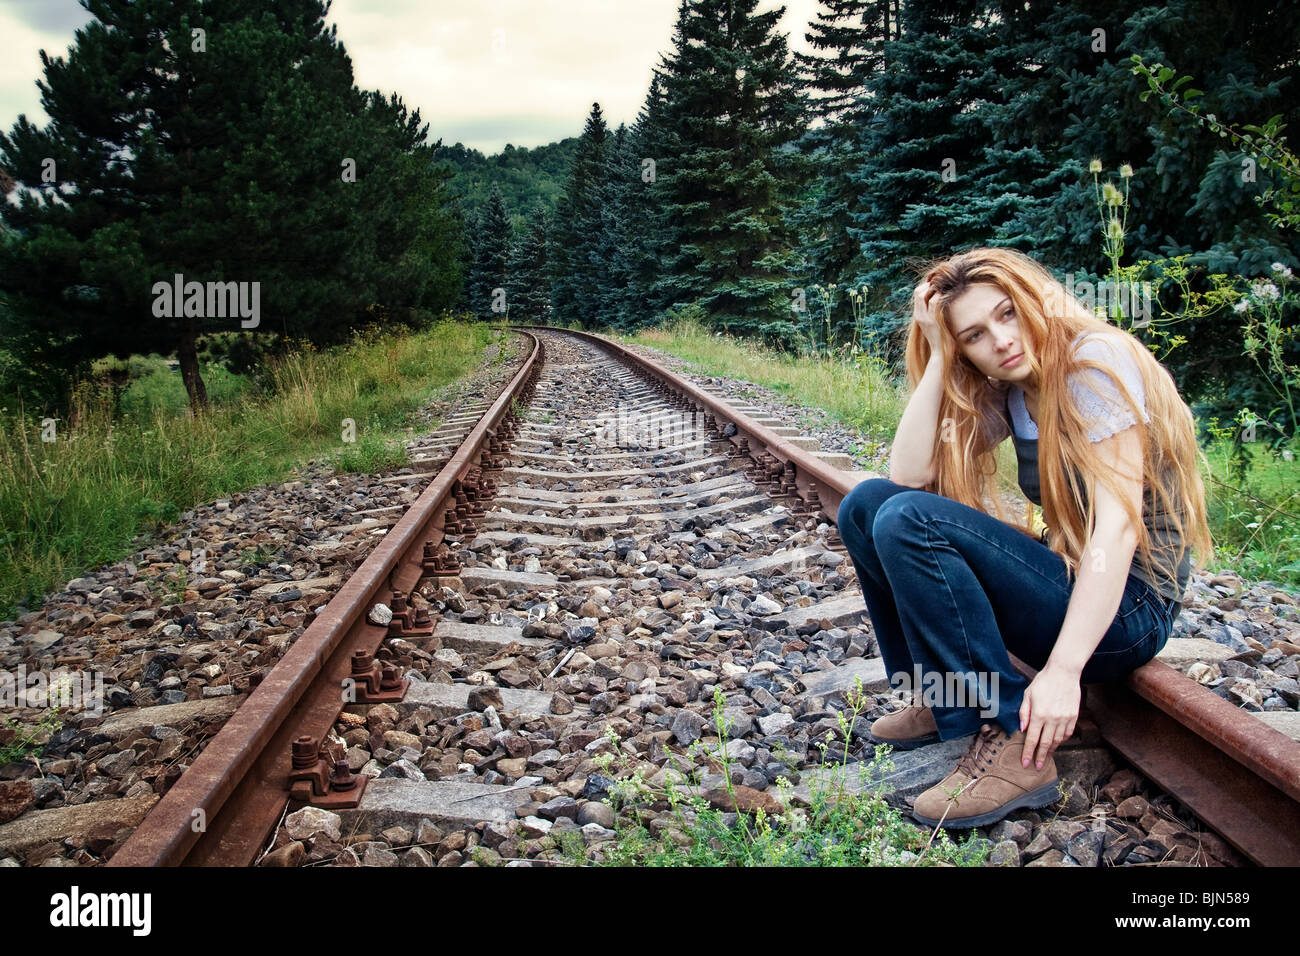 Sad suicidal lonely young woman on railway track Stock Photo